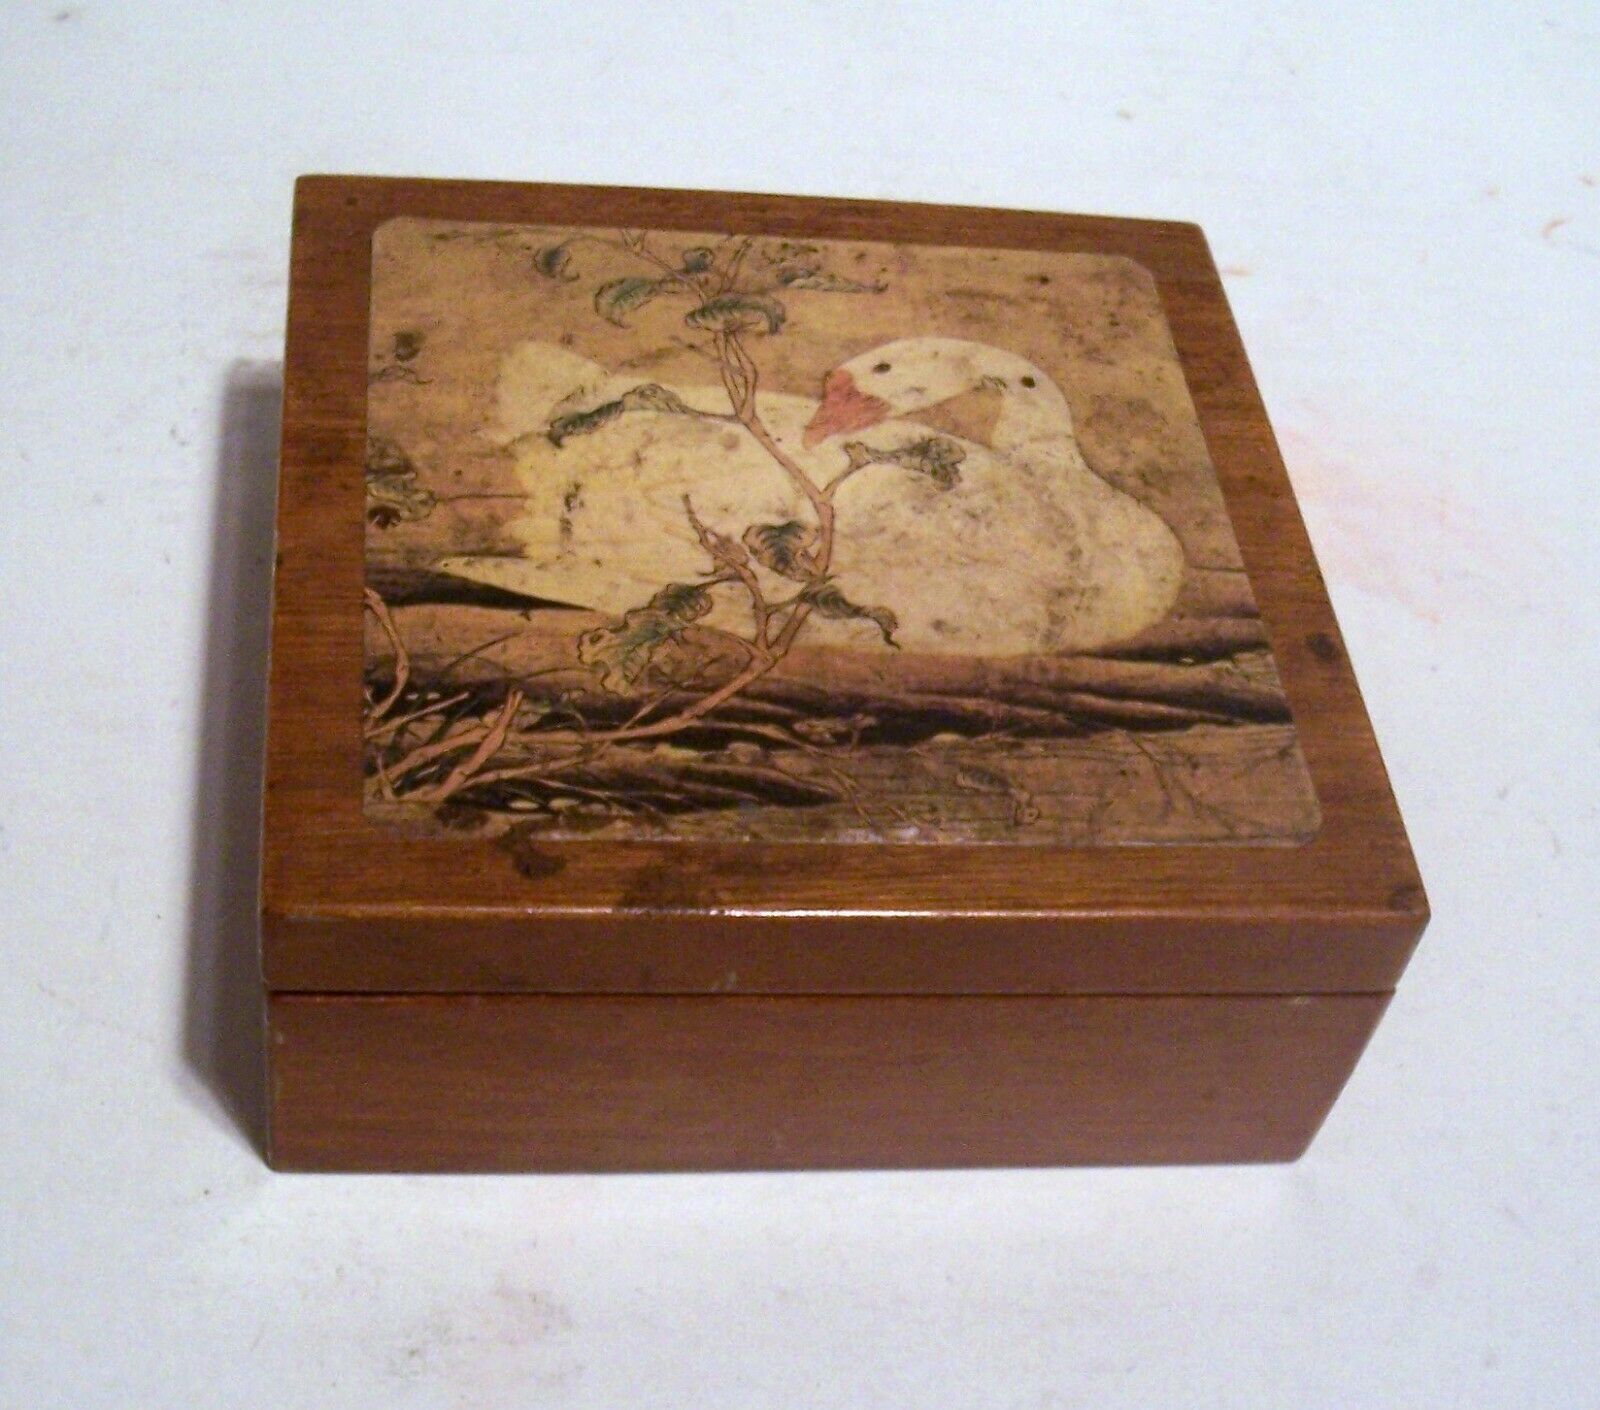 Vintage Wooden Coasters Set of 5 Swan Picture Design with Wooden Storage Chest - $19.77